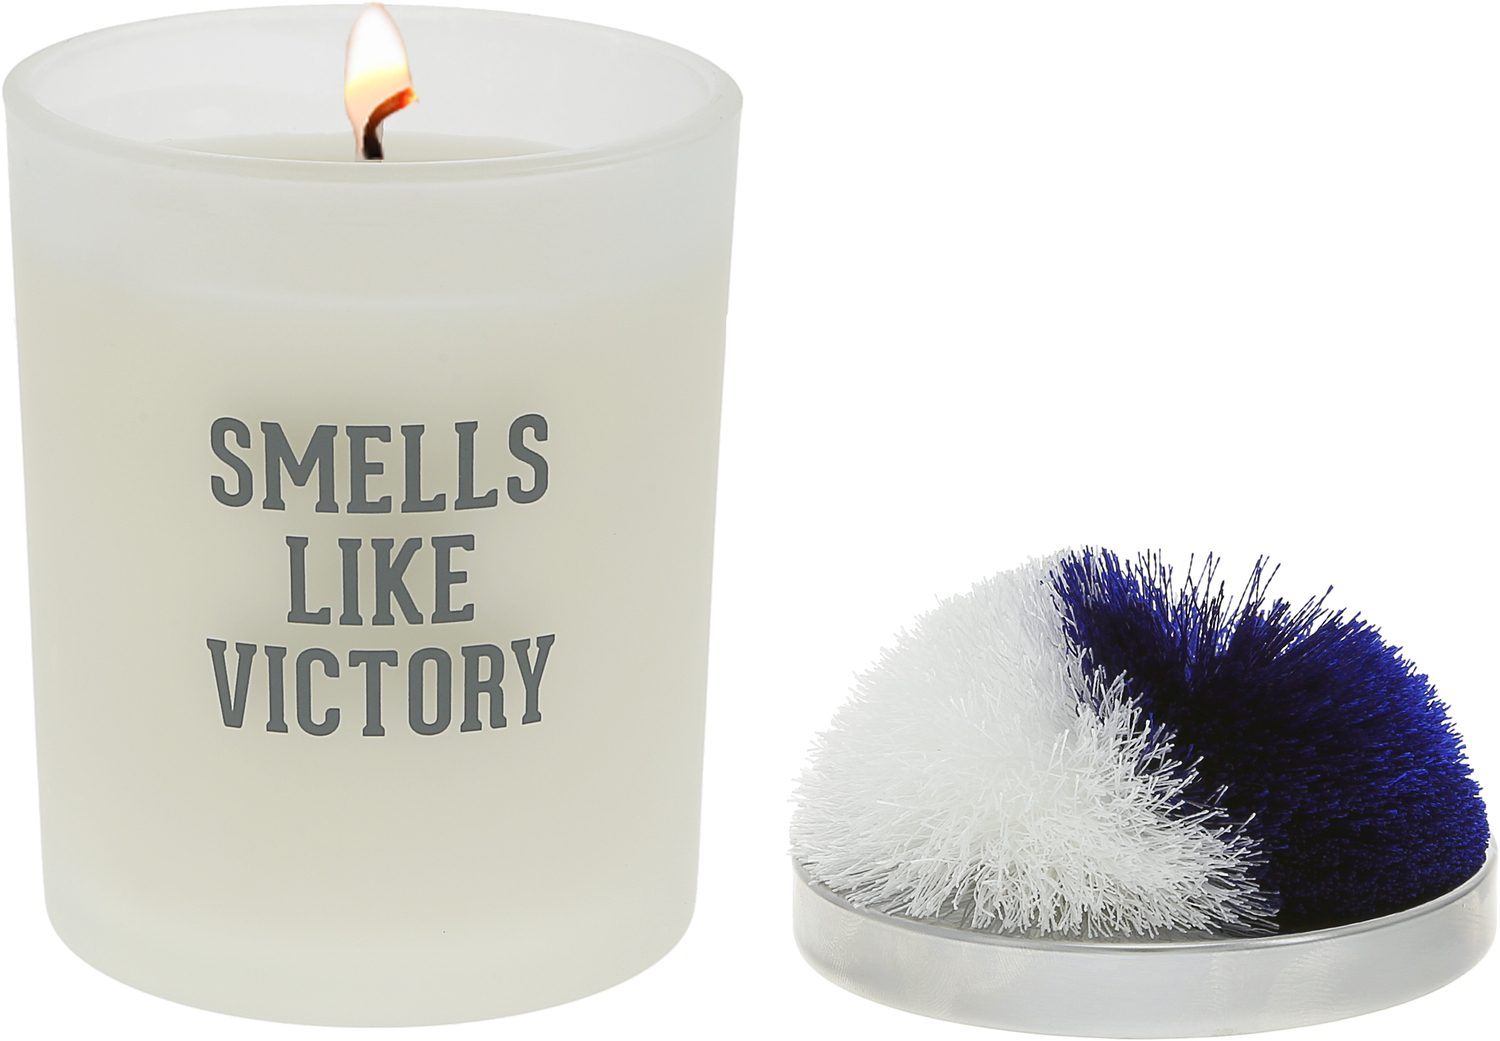 Victory - Blue & White by Repre-Scent - Victory - Blue & White - 5.5 oz - 100% Soy Wax Candle with Pom Pom Lid
Scent: Tranquility